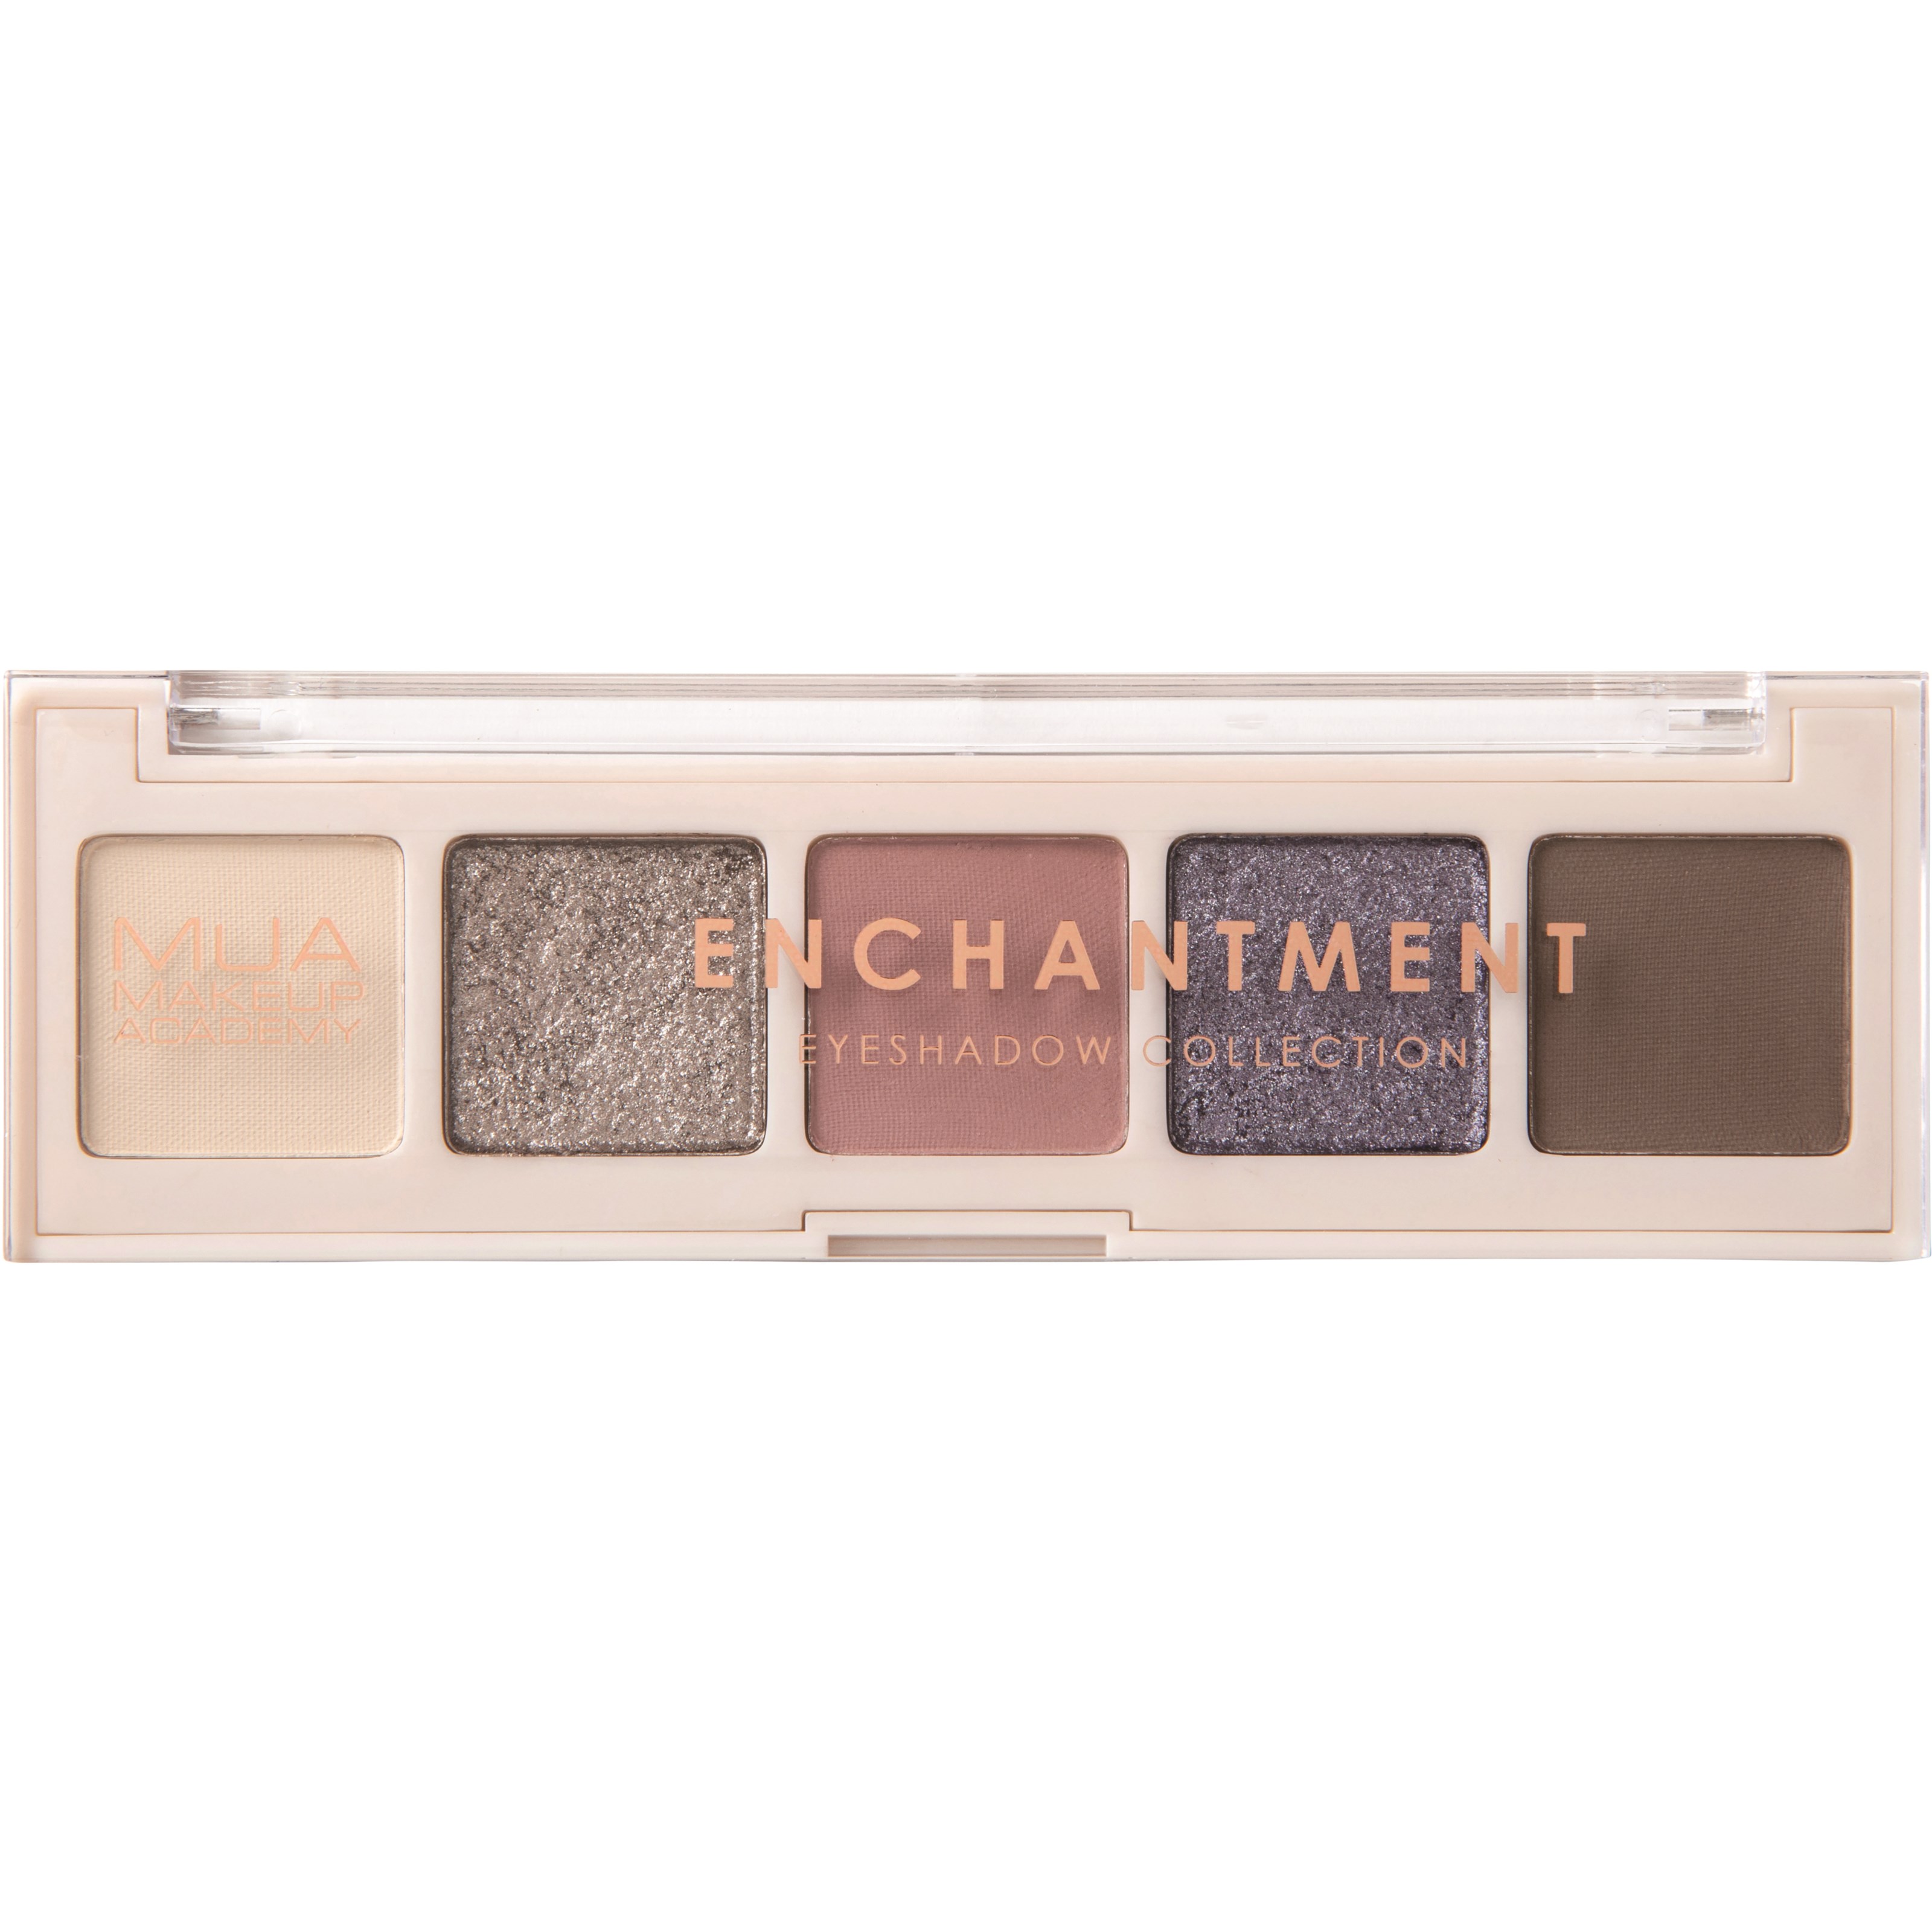 Makeup Academy Eyeshadow Palette 5 Shades Enchantment